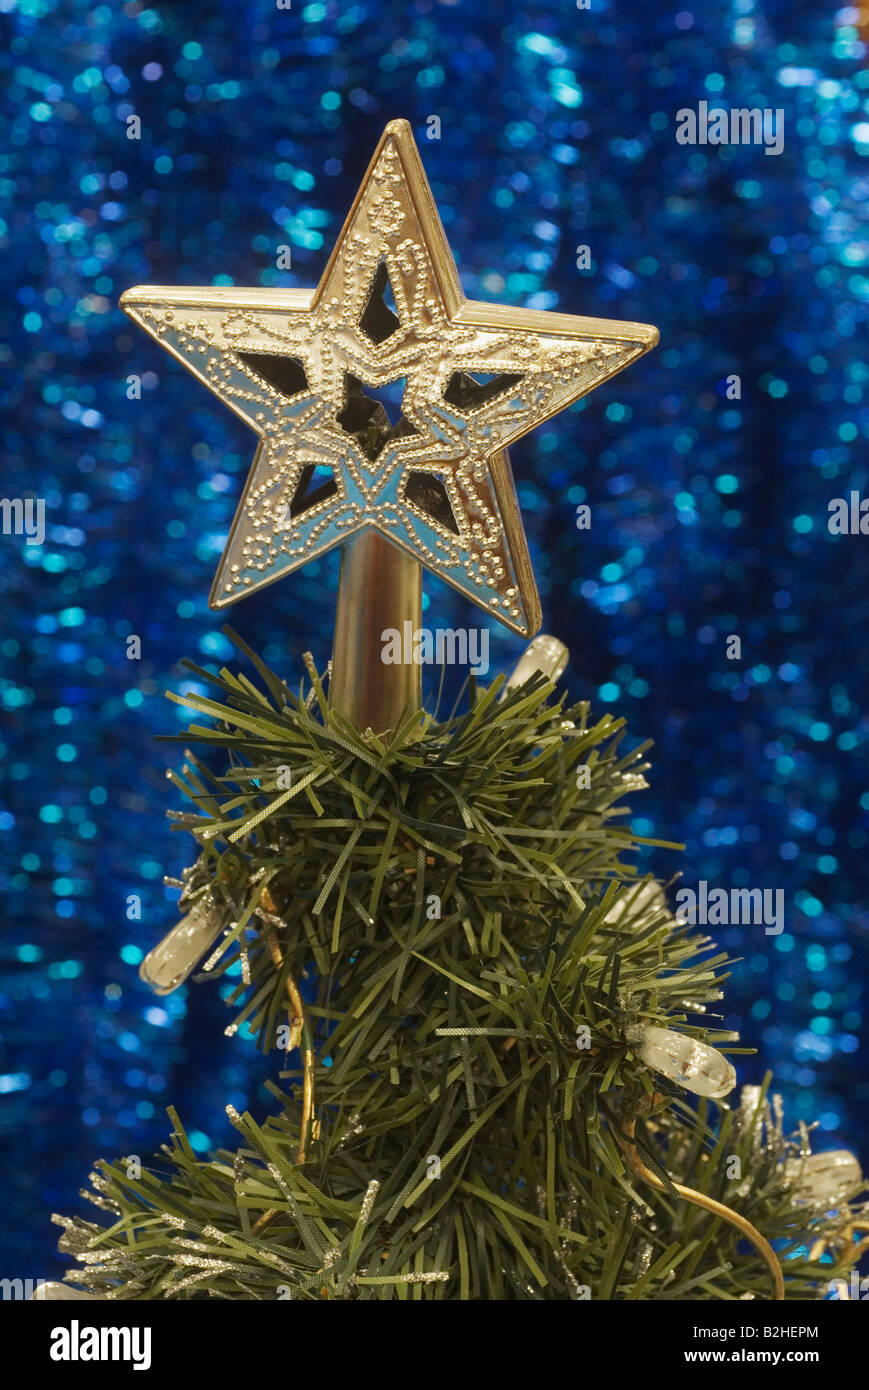 golden star on top of christmas tree Stock Photo